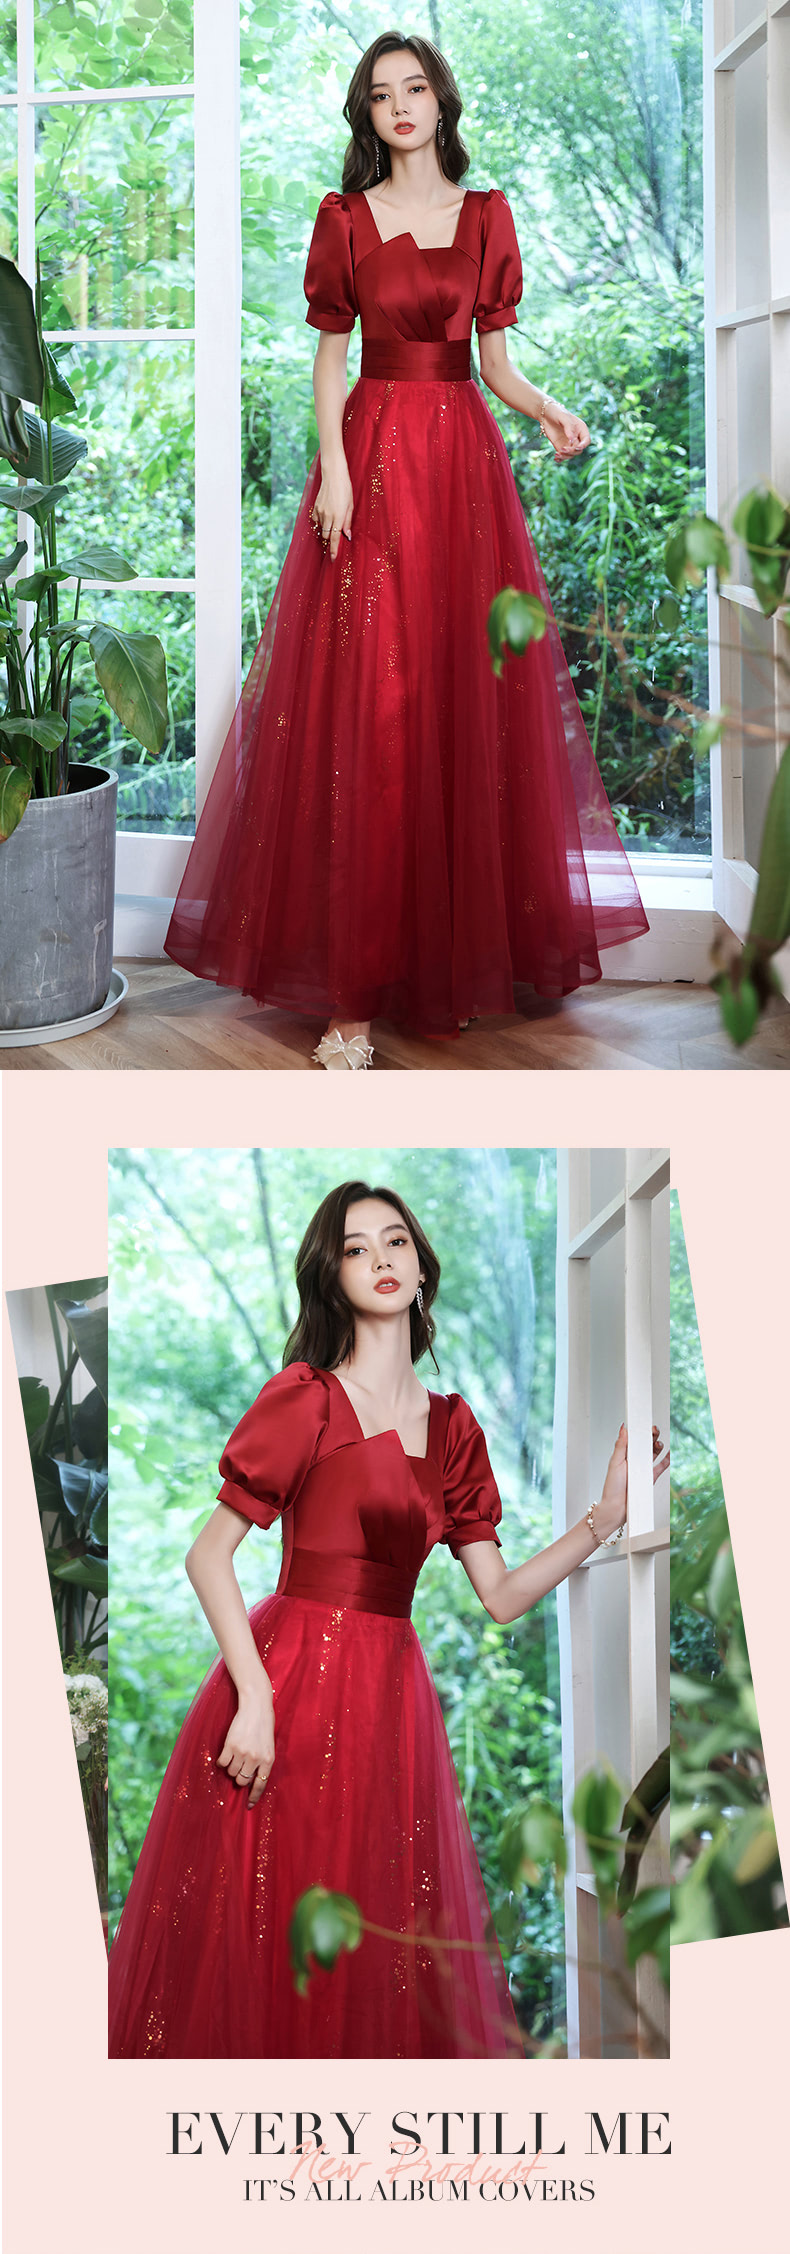 Square-Neck-Short-Puff-Sleeve-Burgundy-Tulle-Prom-Party-Dress15.jpg